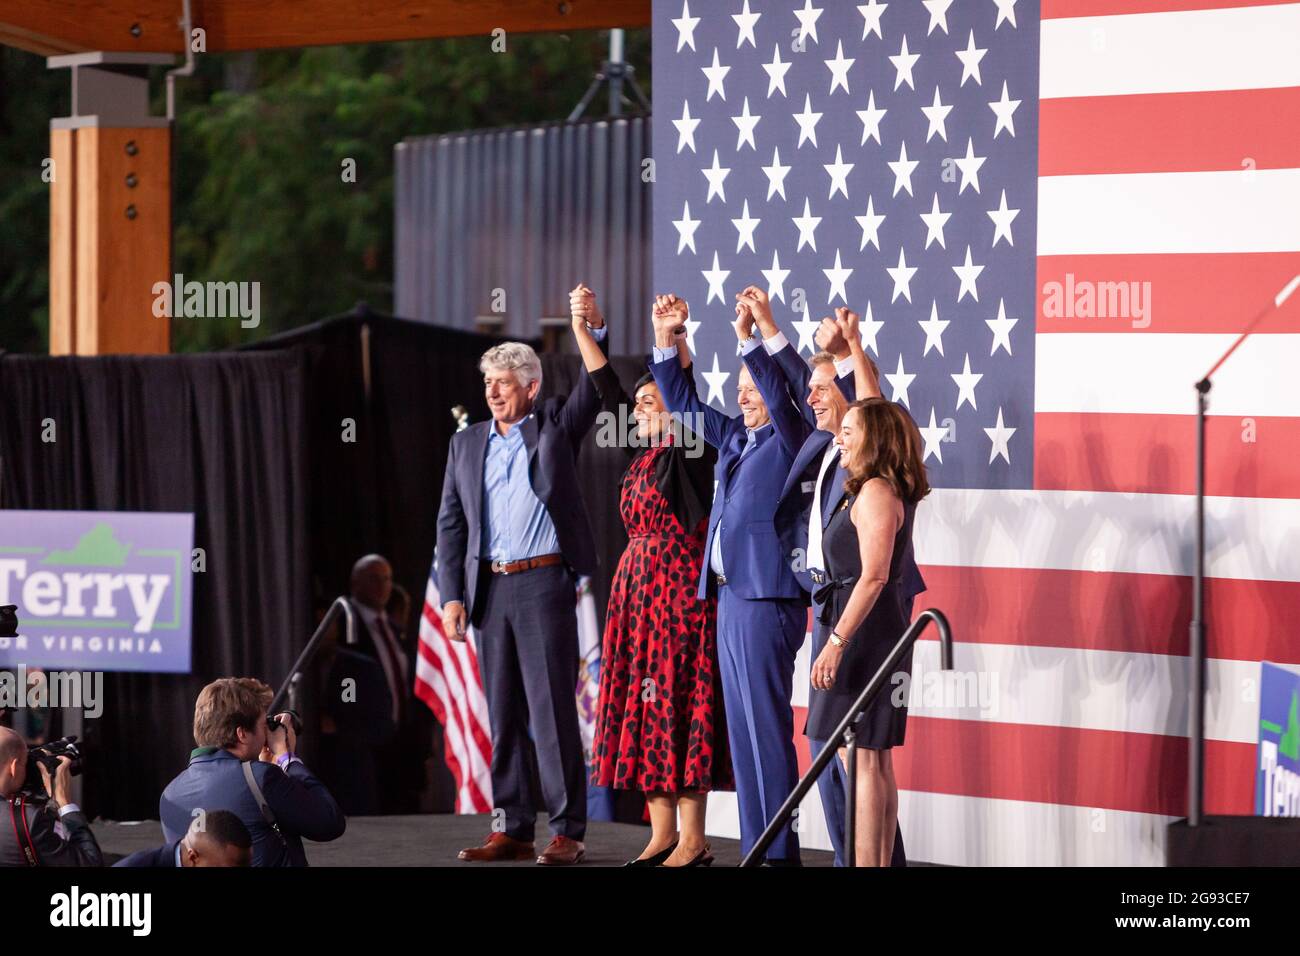 Virginia, USA. 23rd July, 2021. Virginia Attorney General Mark Herring, Delegate Hala Ayala, President Joe Biden, and Terry and Dorothy McAuliffe jjoin hands on stage at the end of a rally for Terry McAuliffe's campaign for Virginia governor.  This is Biden’s first major appearance in support of a Democratic candidate.  McAuliffe served one term as governor of Virginia and is running for a second term. Credit: Allison Bailey/Alamy Live News Stock Photo